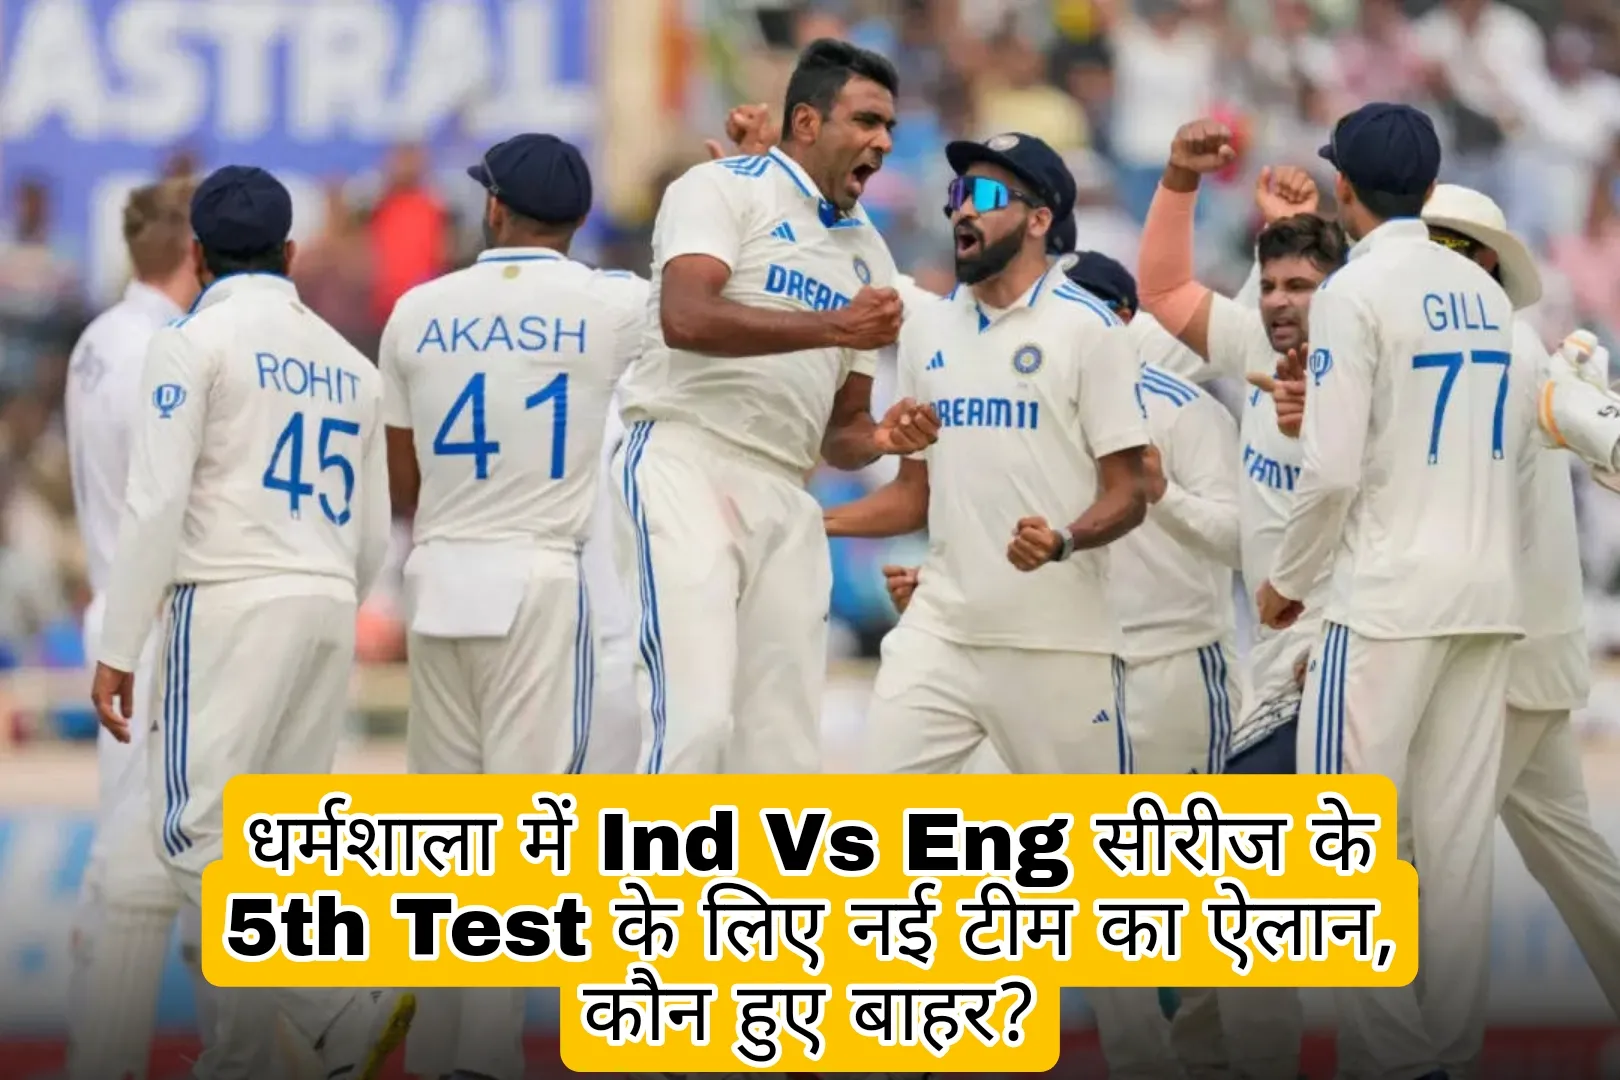 IND Vs ENG 5th Test Match